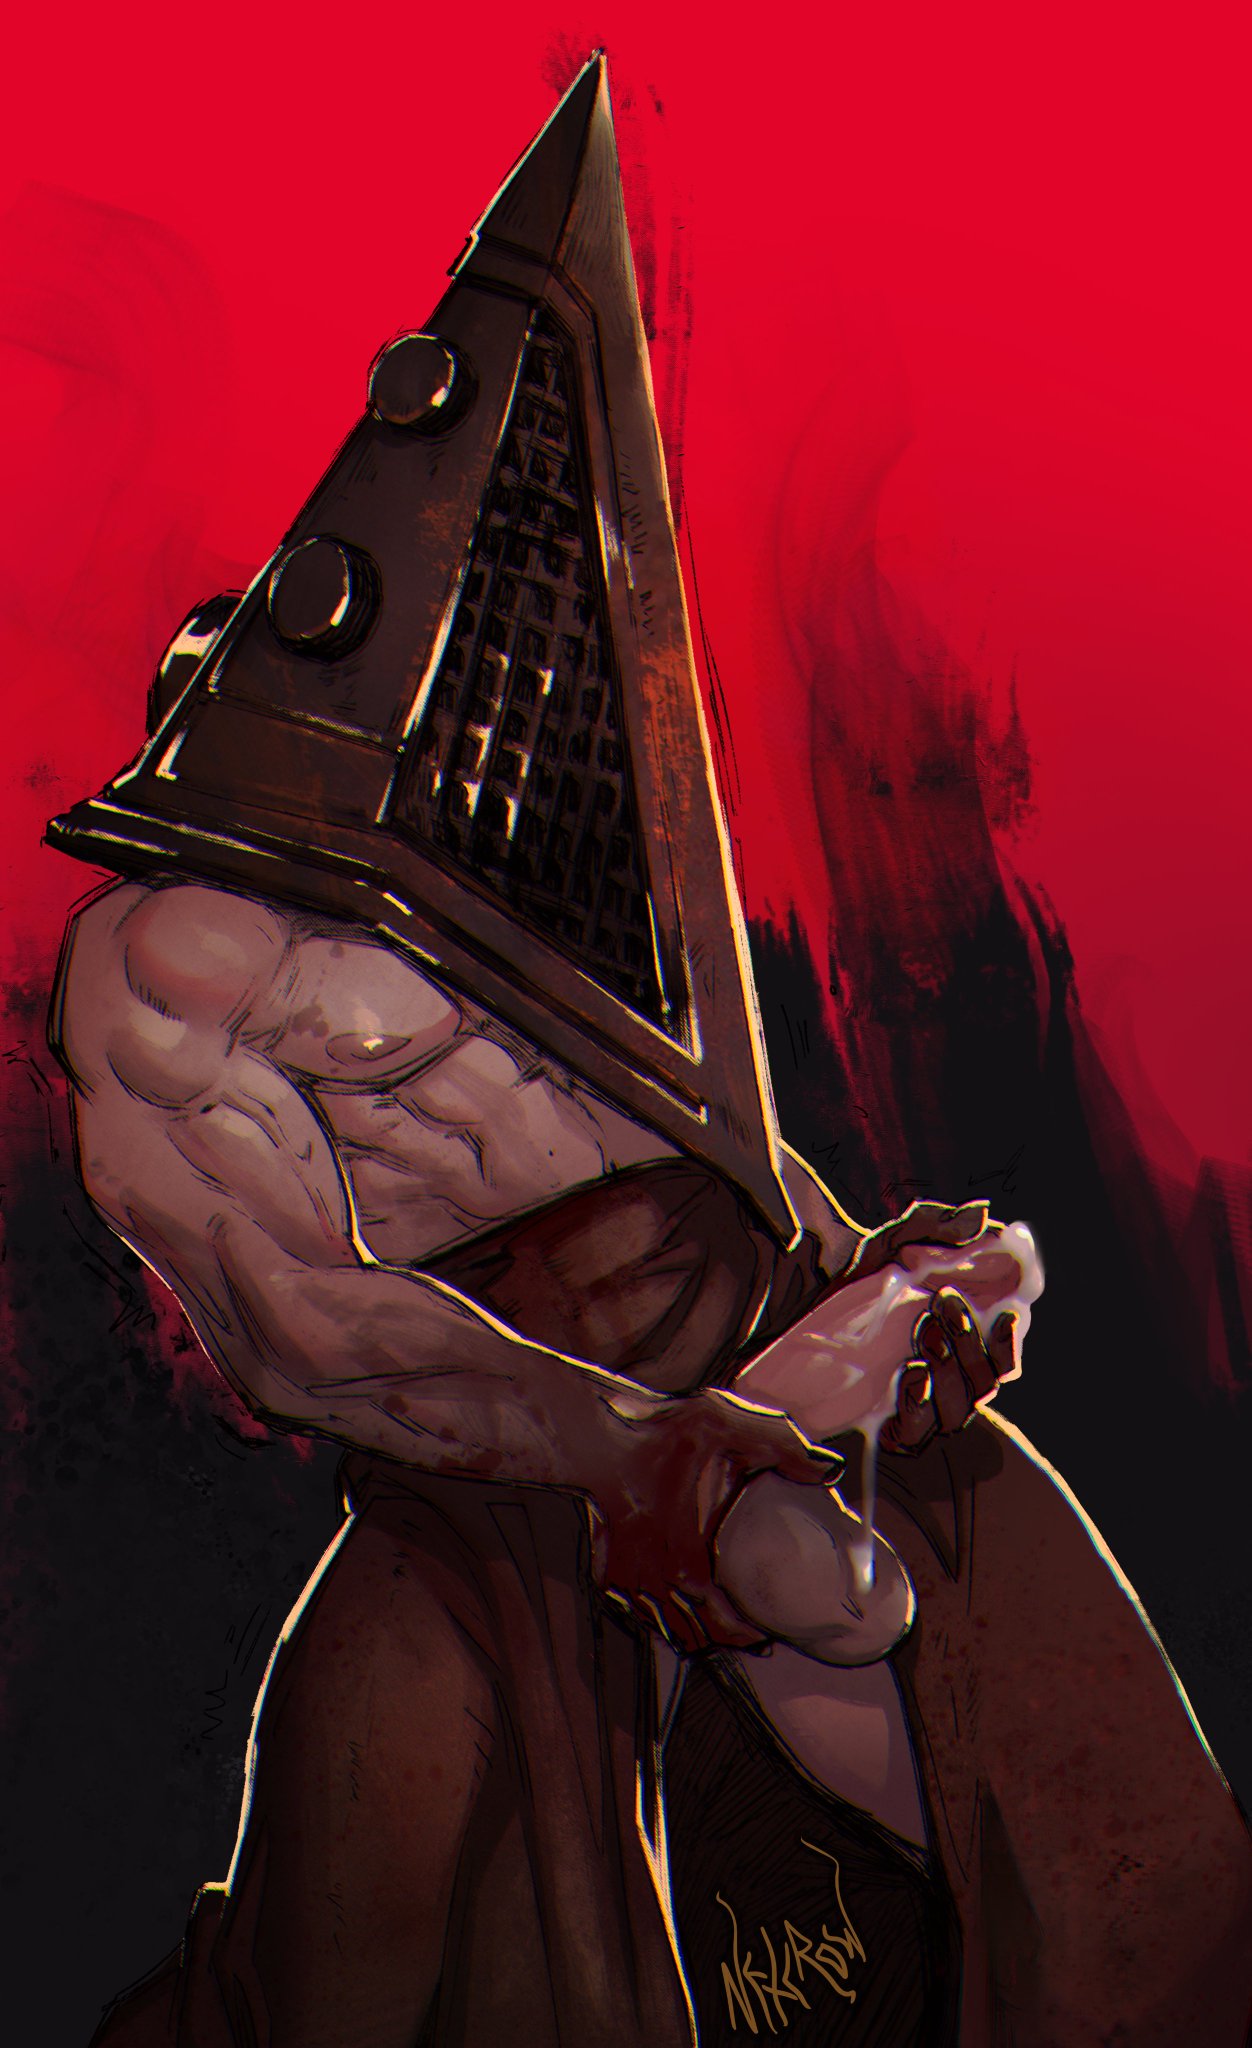 pyramid head, silent hill, silent hill 2, big penis, gay, netcrow98.